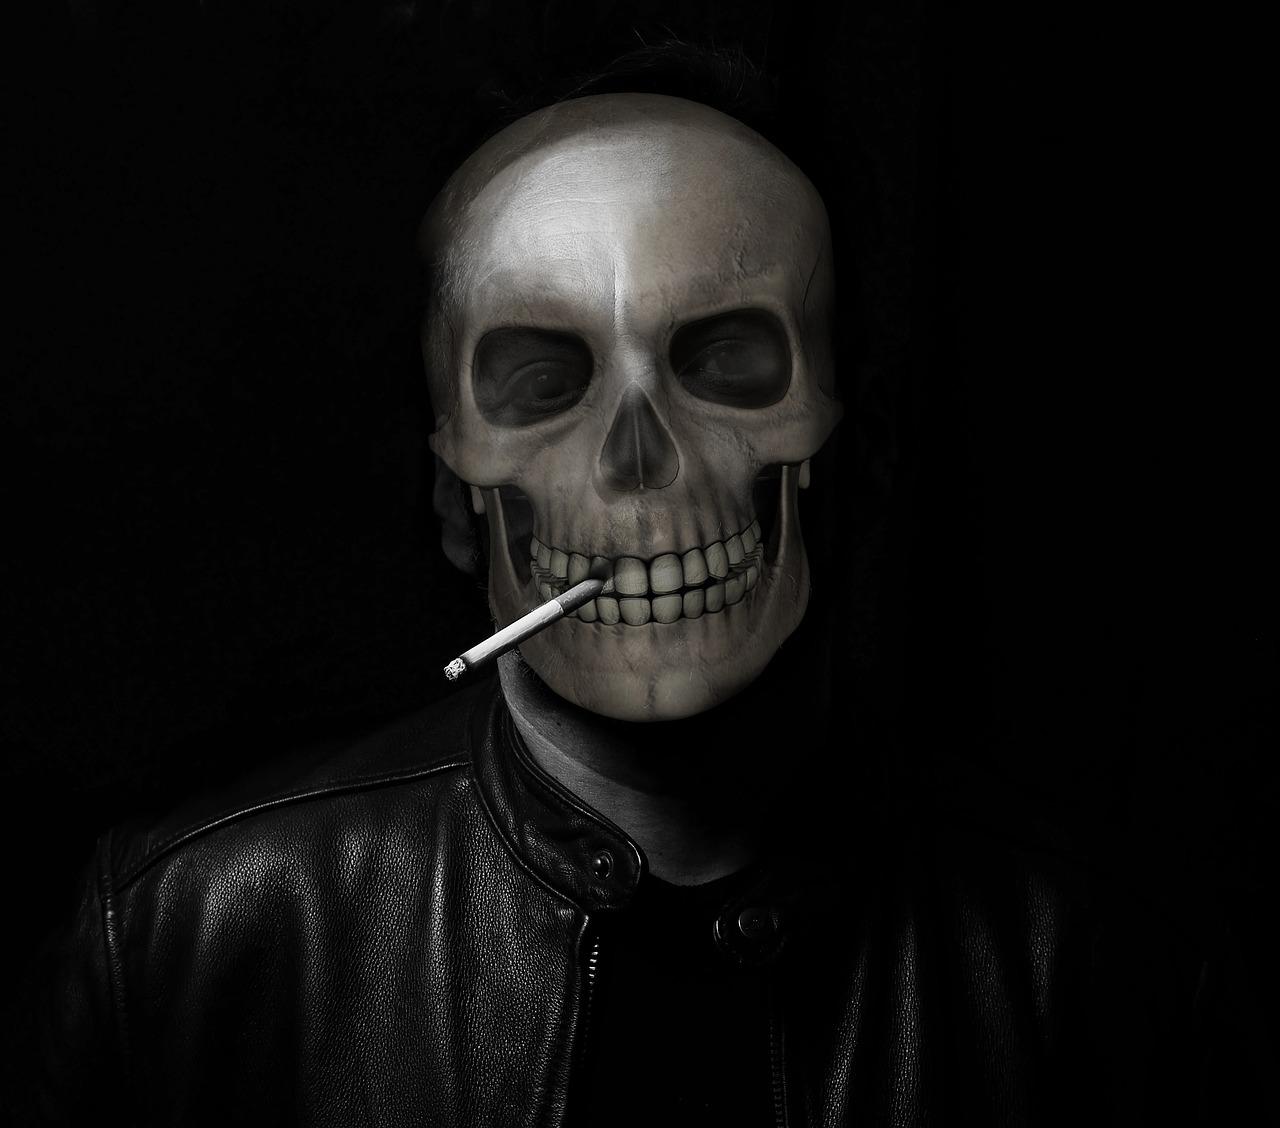 a man with a cigarette in his mouth wearing a skull mask, a portrait, inspired by Robert Mapplethorpe, digital art, gopnik in a black leather jacket, true realistic image, “loss of inner self, cigarette advertising